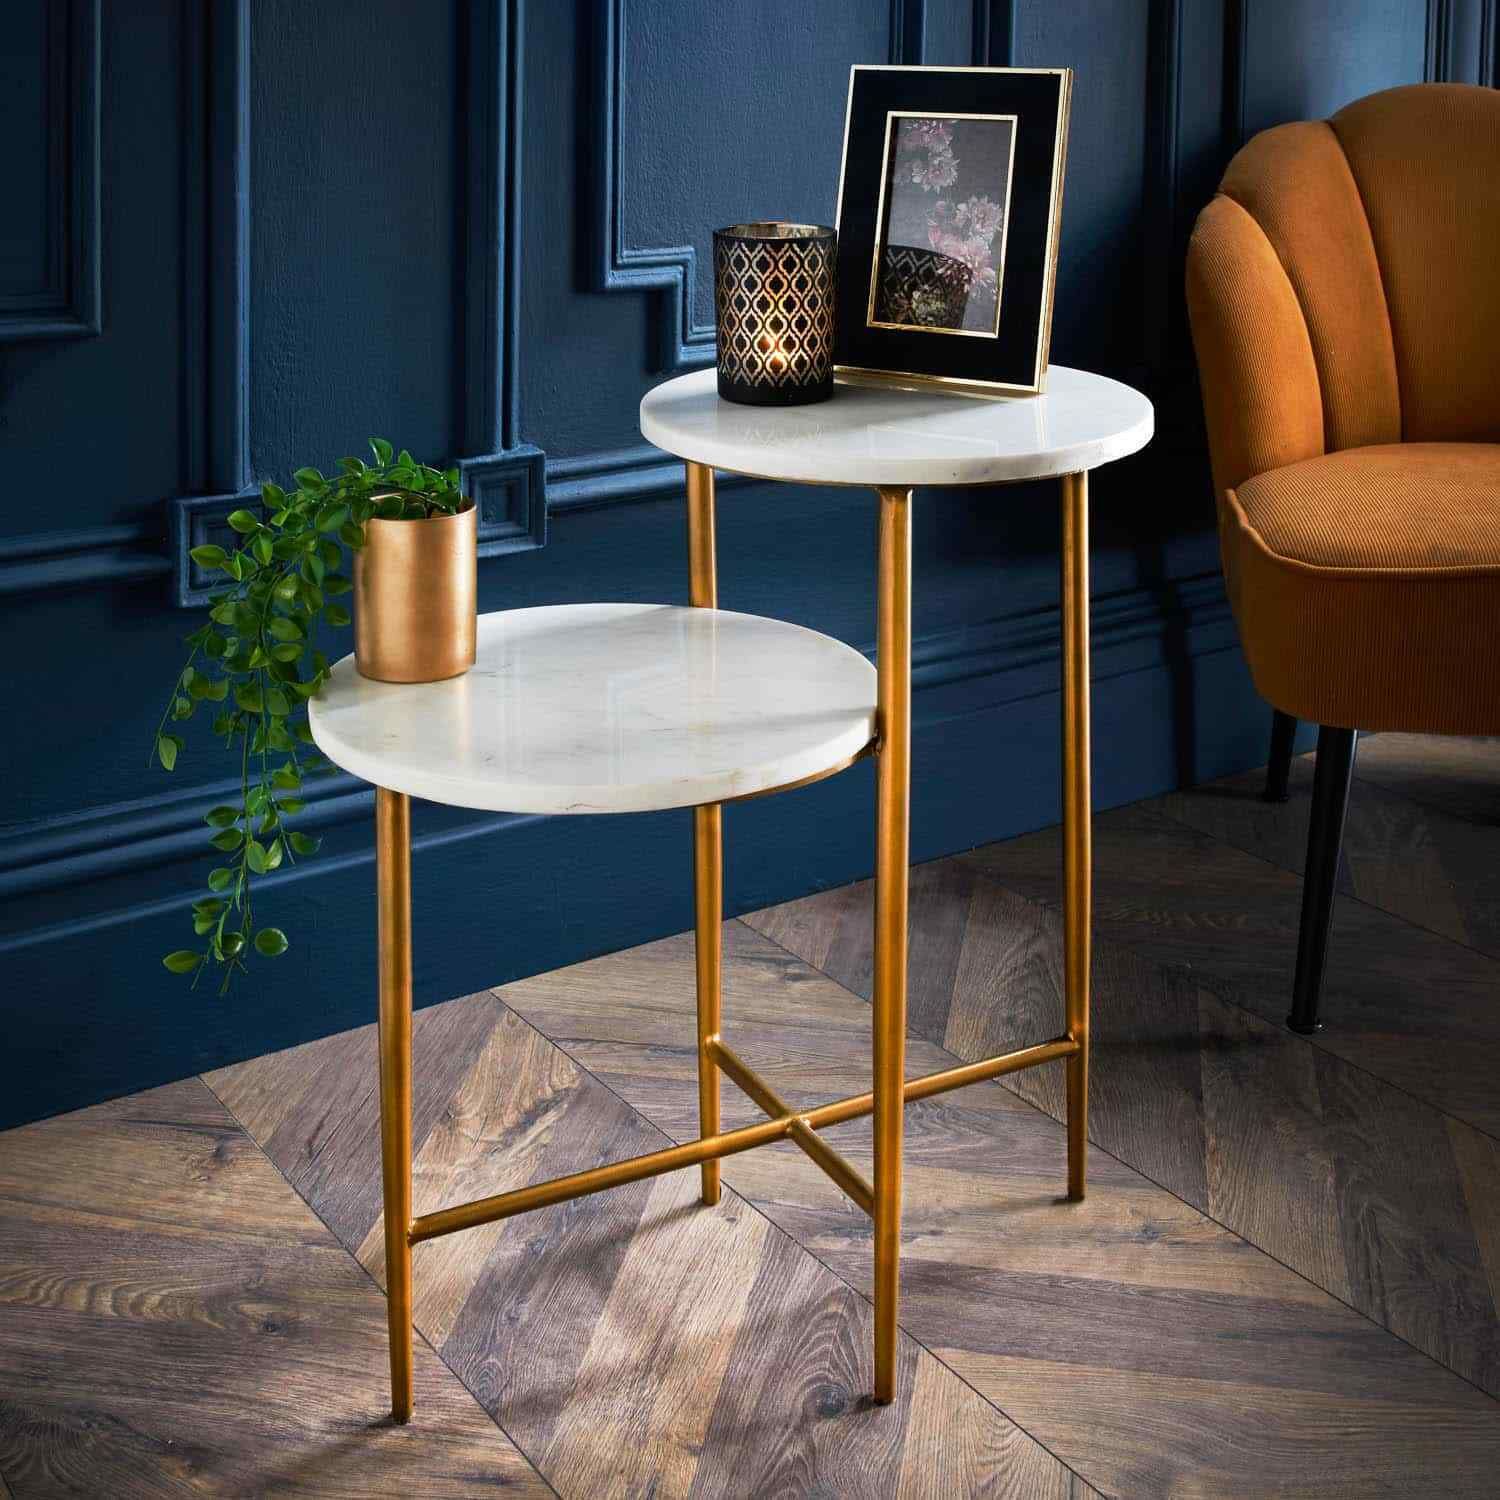 2 Tier Side Table Modern Side Coffee Table With Gold Legs & Solid Marble  Top – Marble Tables Uk Pertaining To Modern 2 Tier Coffee Tables Coffee Tables (View 8 of 20)